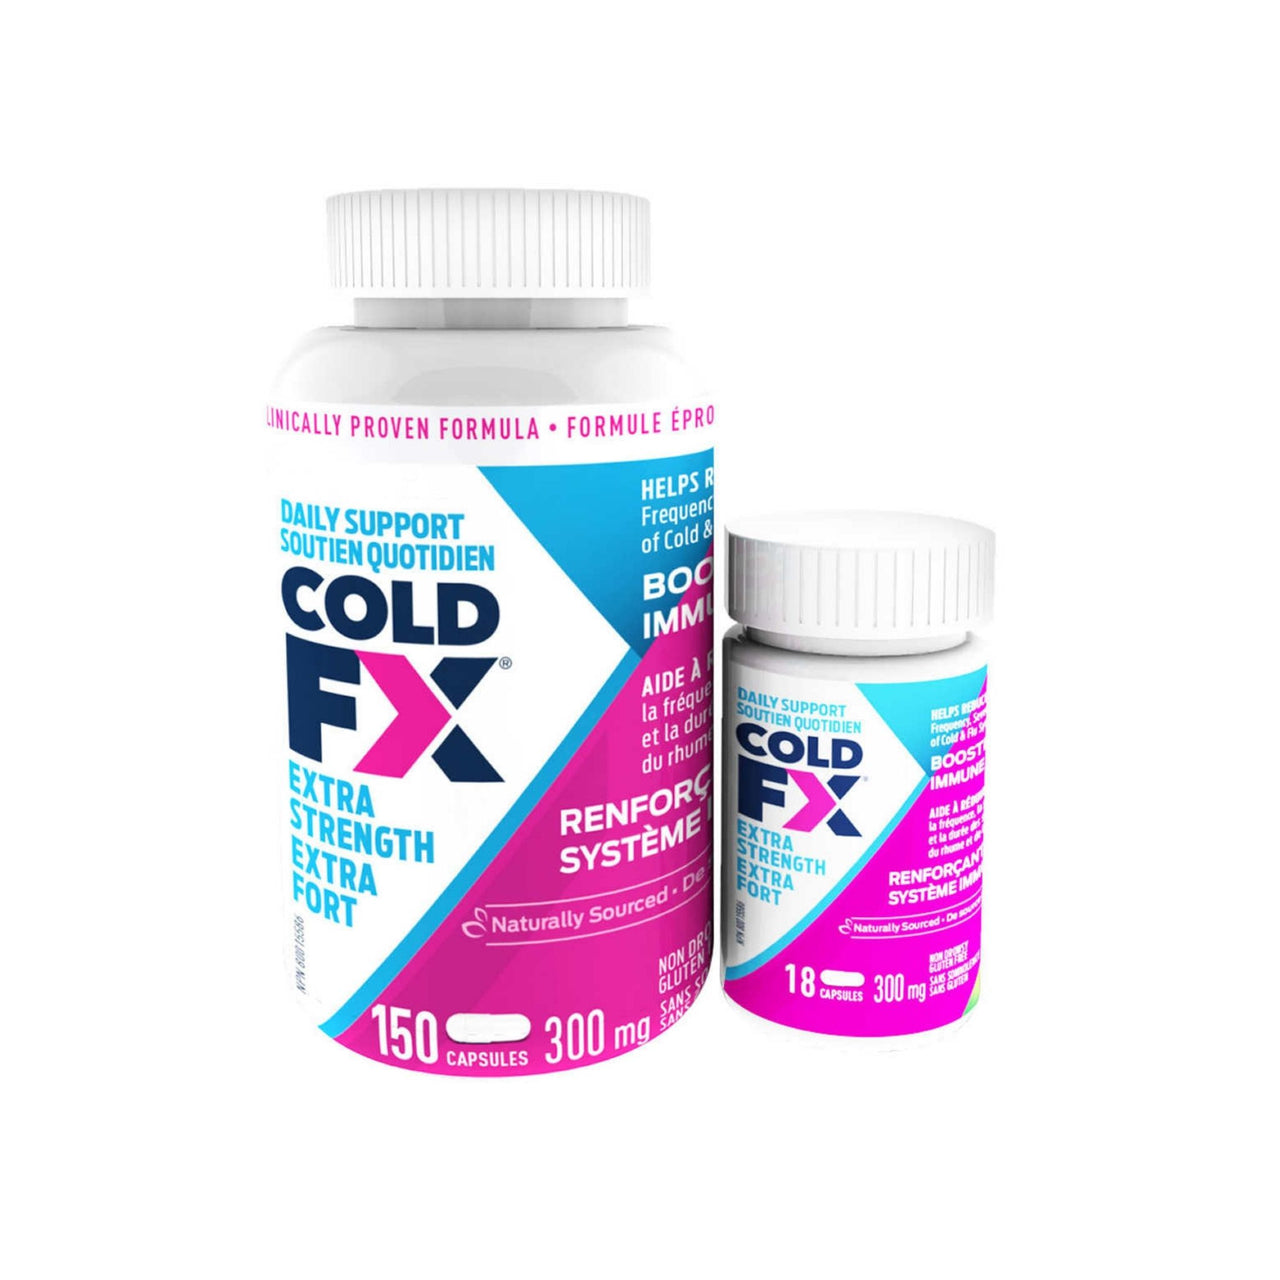 Image of COLD-FX Extra Strength, 300 mg,150 + 18 capsules